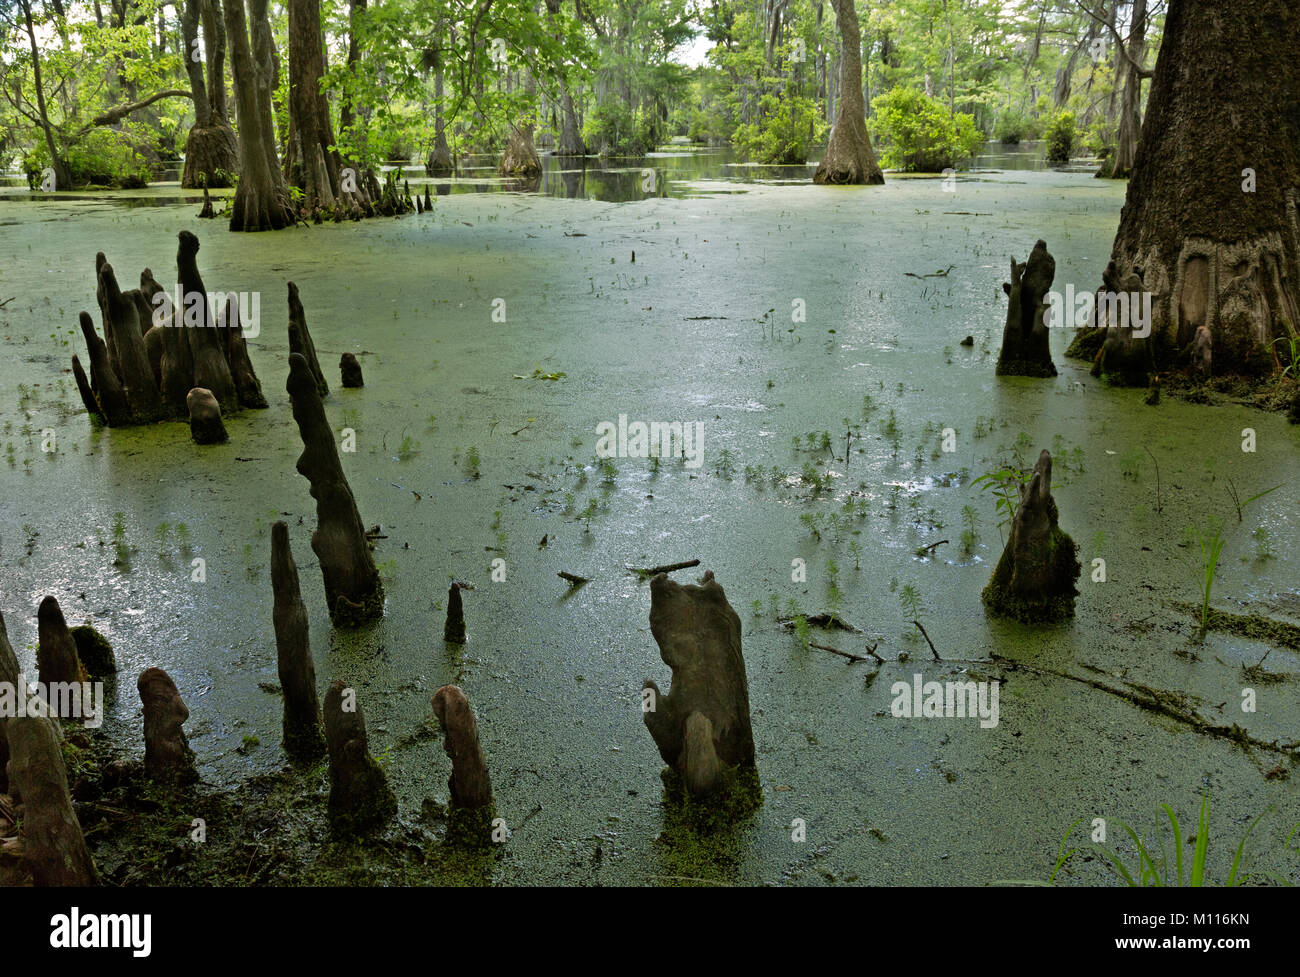 NC01444-00...NORTH CAROLINA - Cyress knees sticking through the duckweed in the still waters of Merchant Millpond in Merchant Millpond State Park. Stock Photo